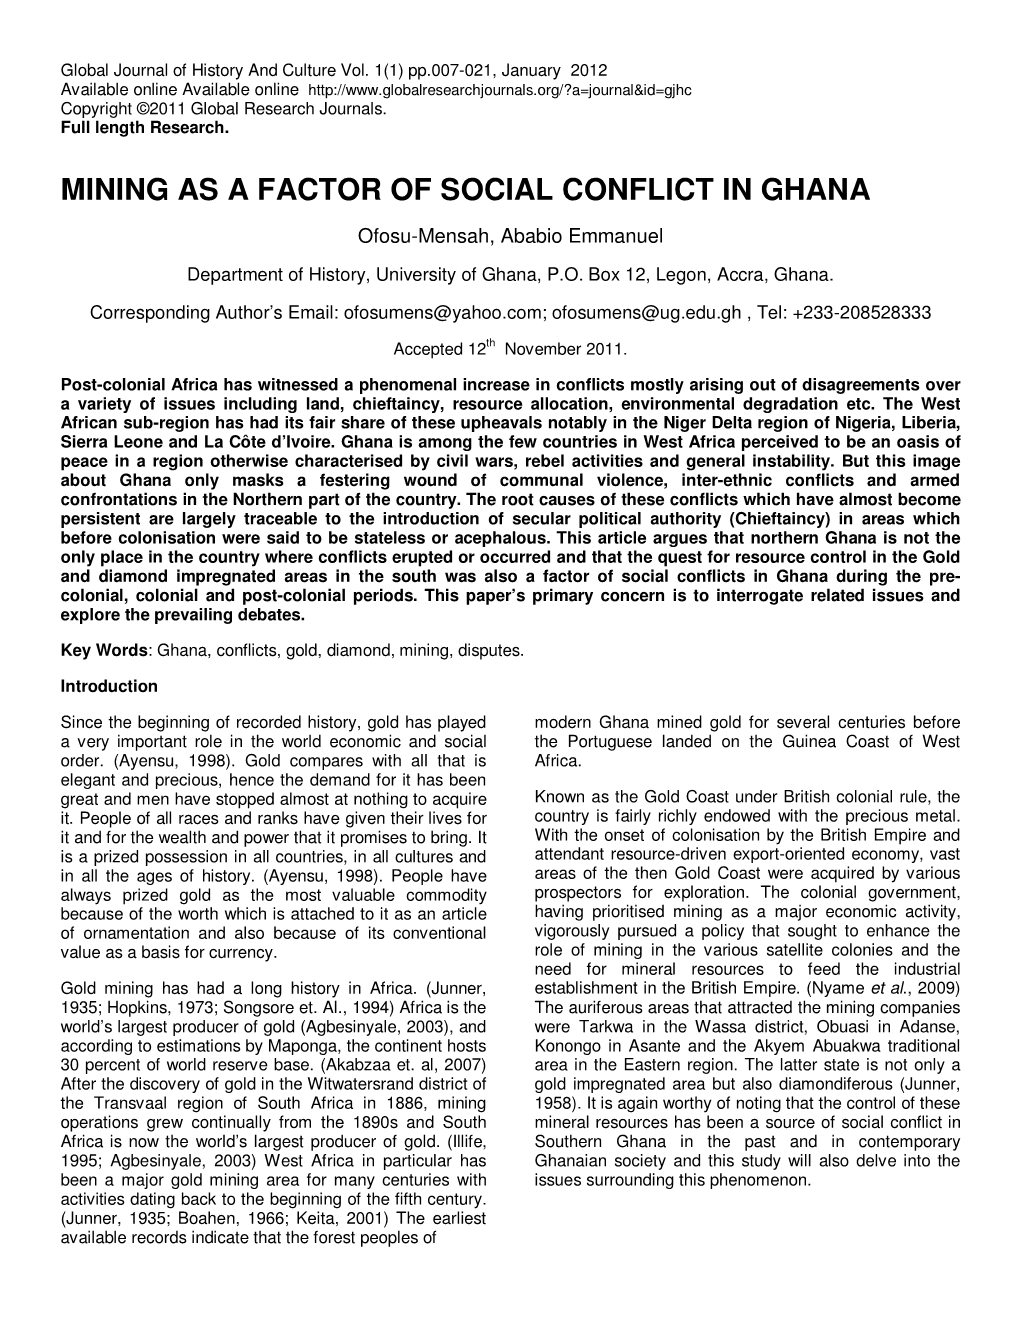 Mining As a Factor of Social Conflict in Ghana